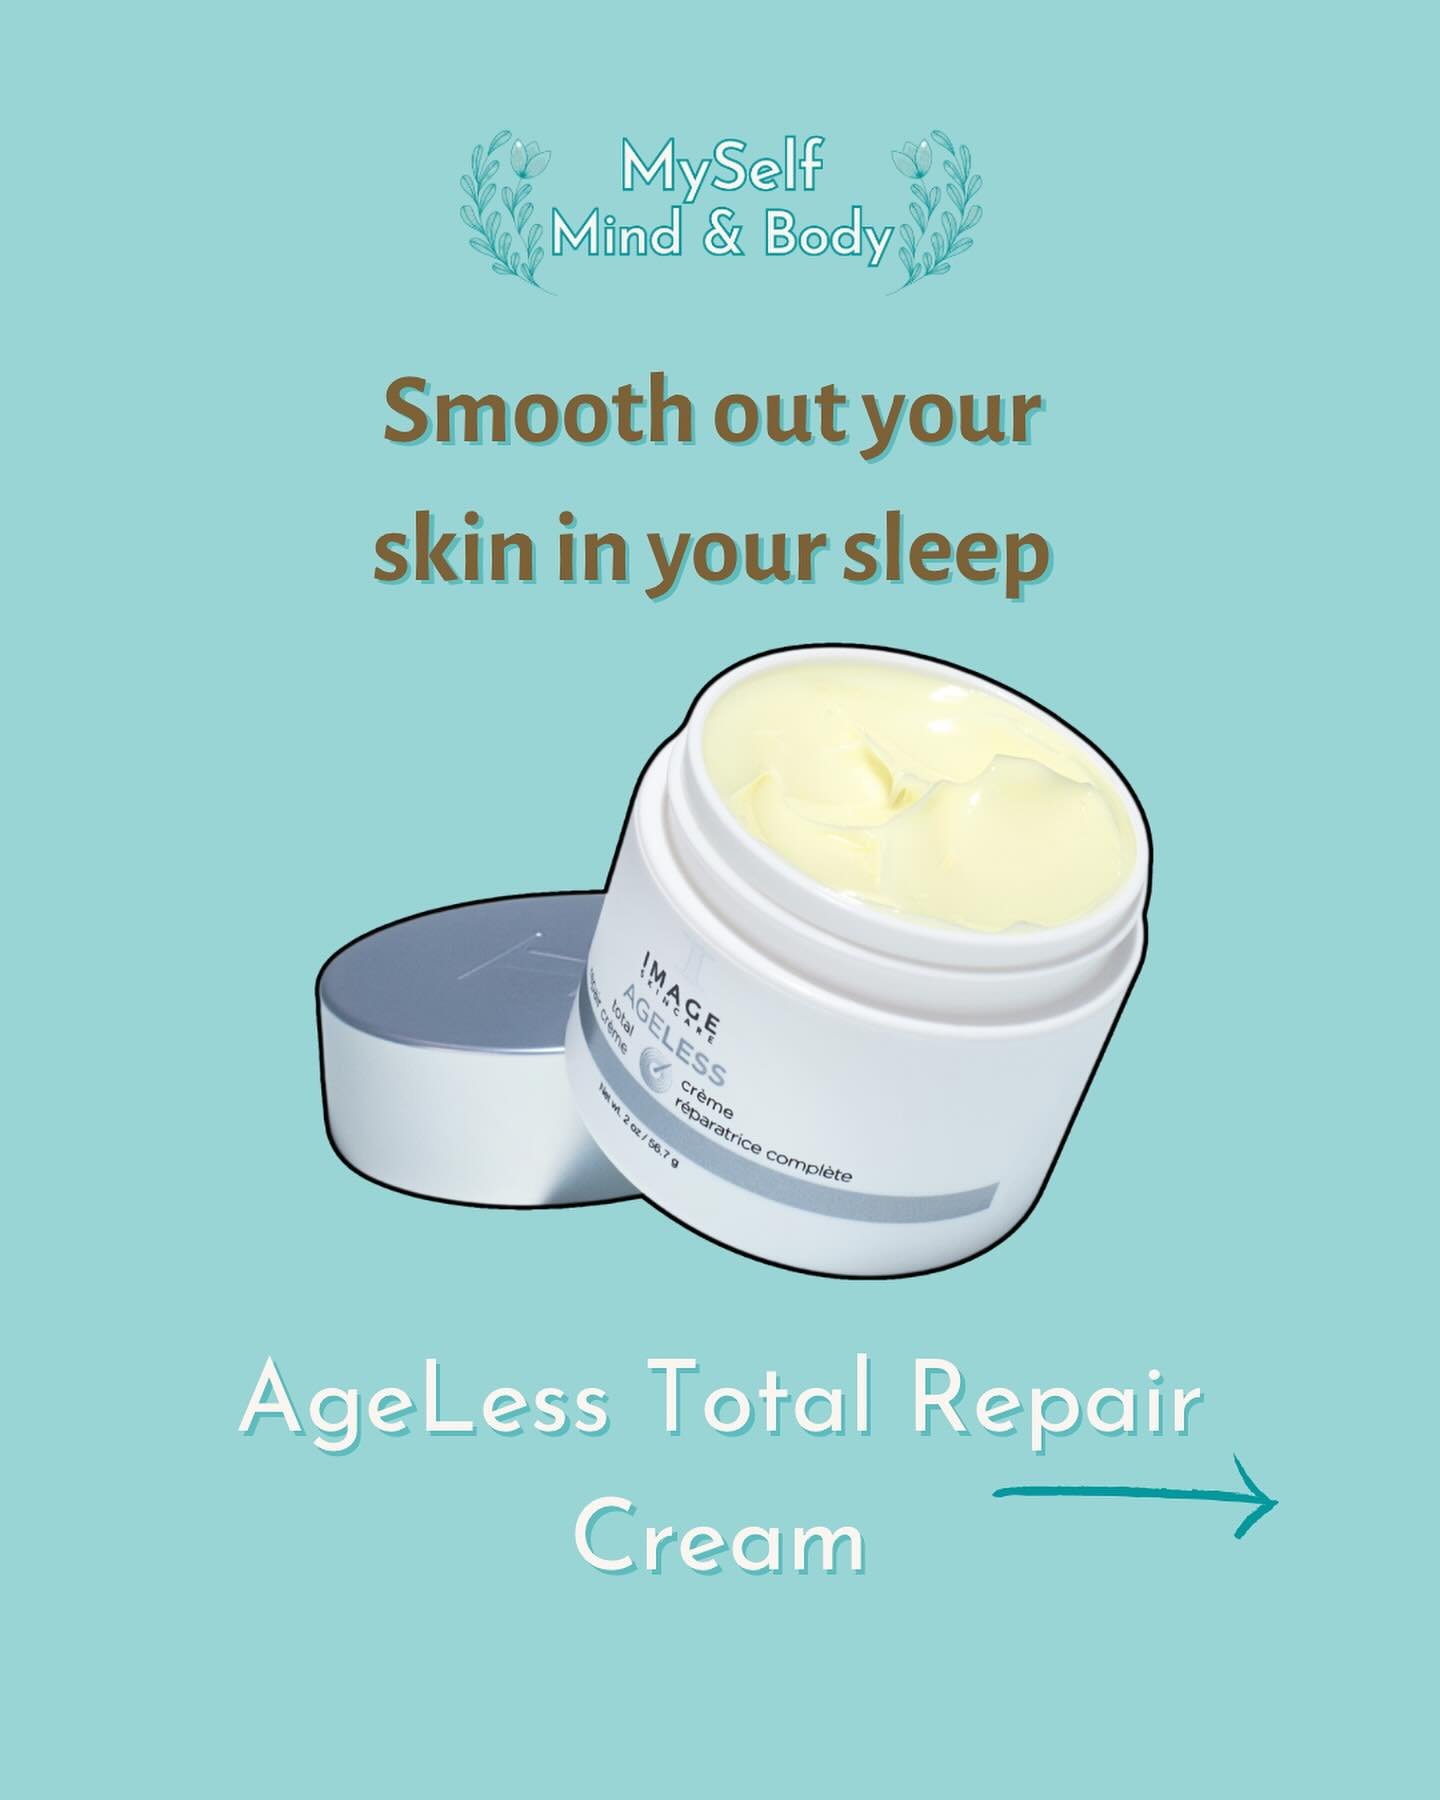 Transform your skin overnight with retinol night cream! 🌙

✨ This powerful ingredient boosts collagen production, reduces fine lines and wrinkles, evens out skin tone, and fights acne. 

Retinol is a form of vitamin A and is an essential part of a p